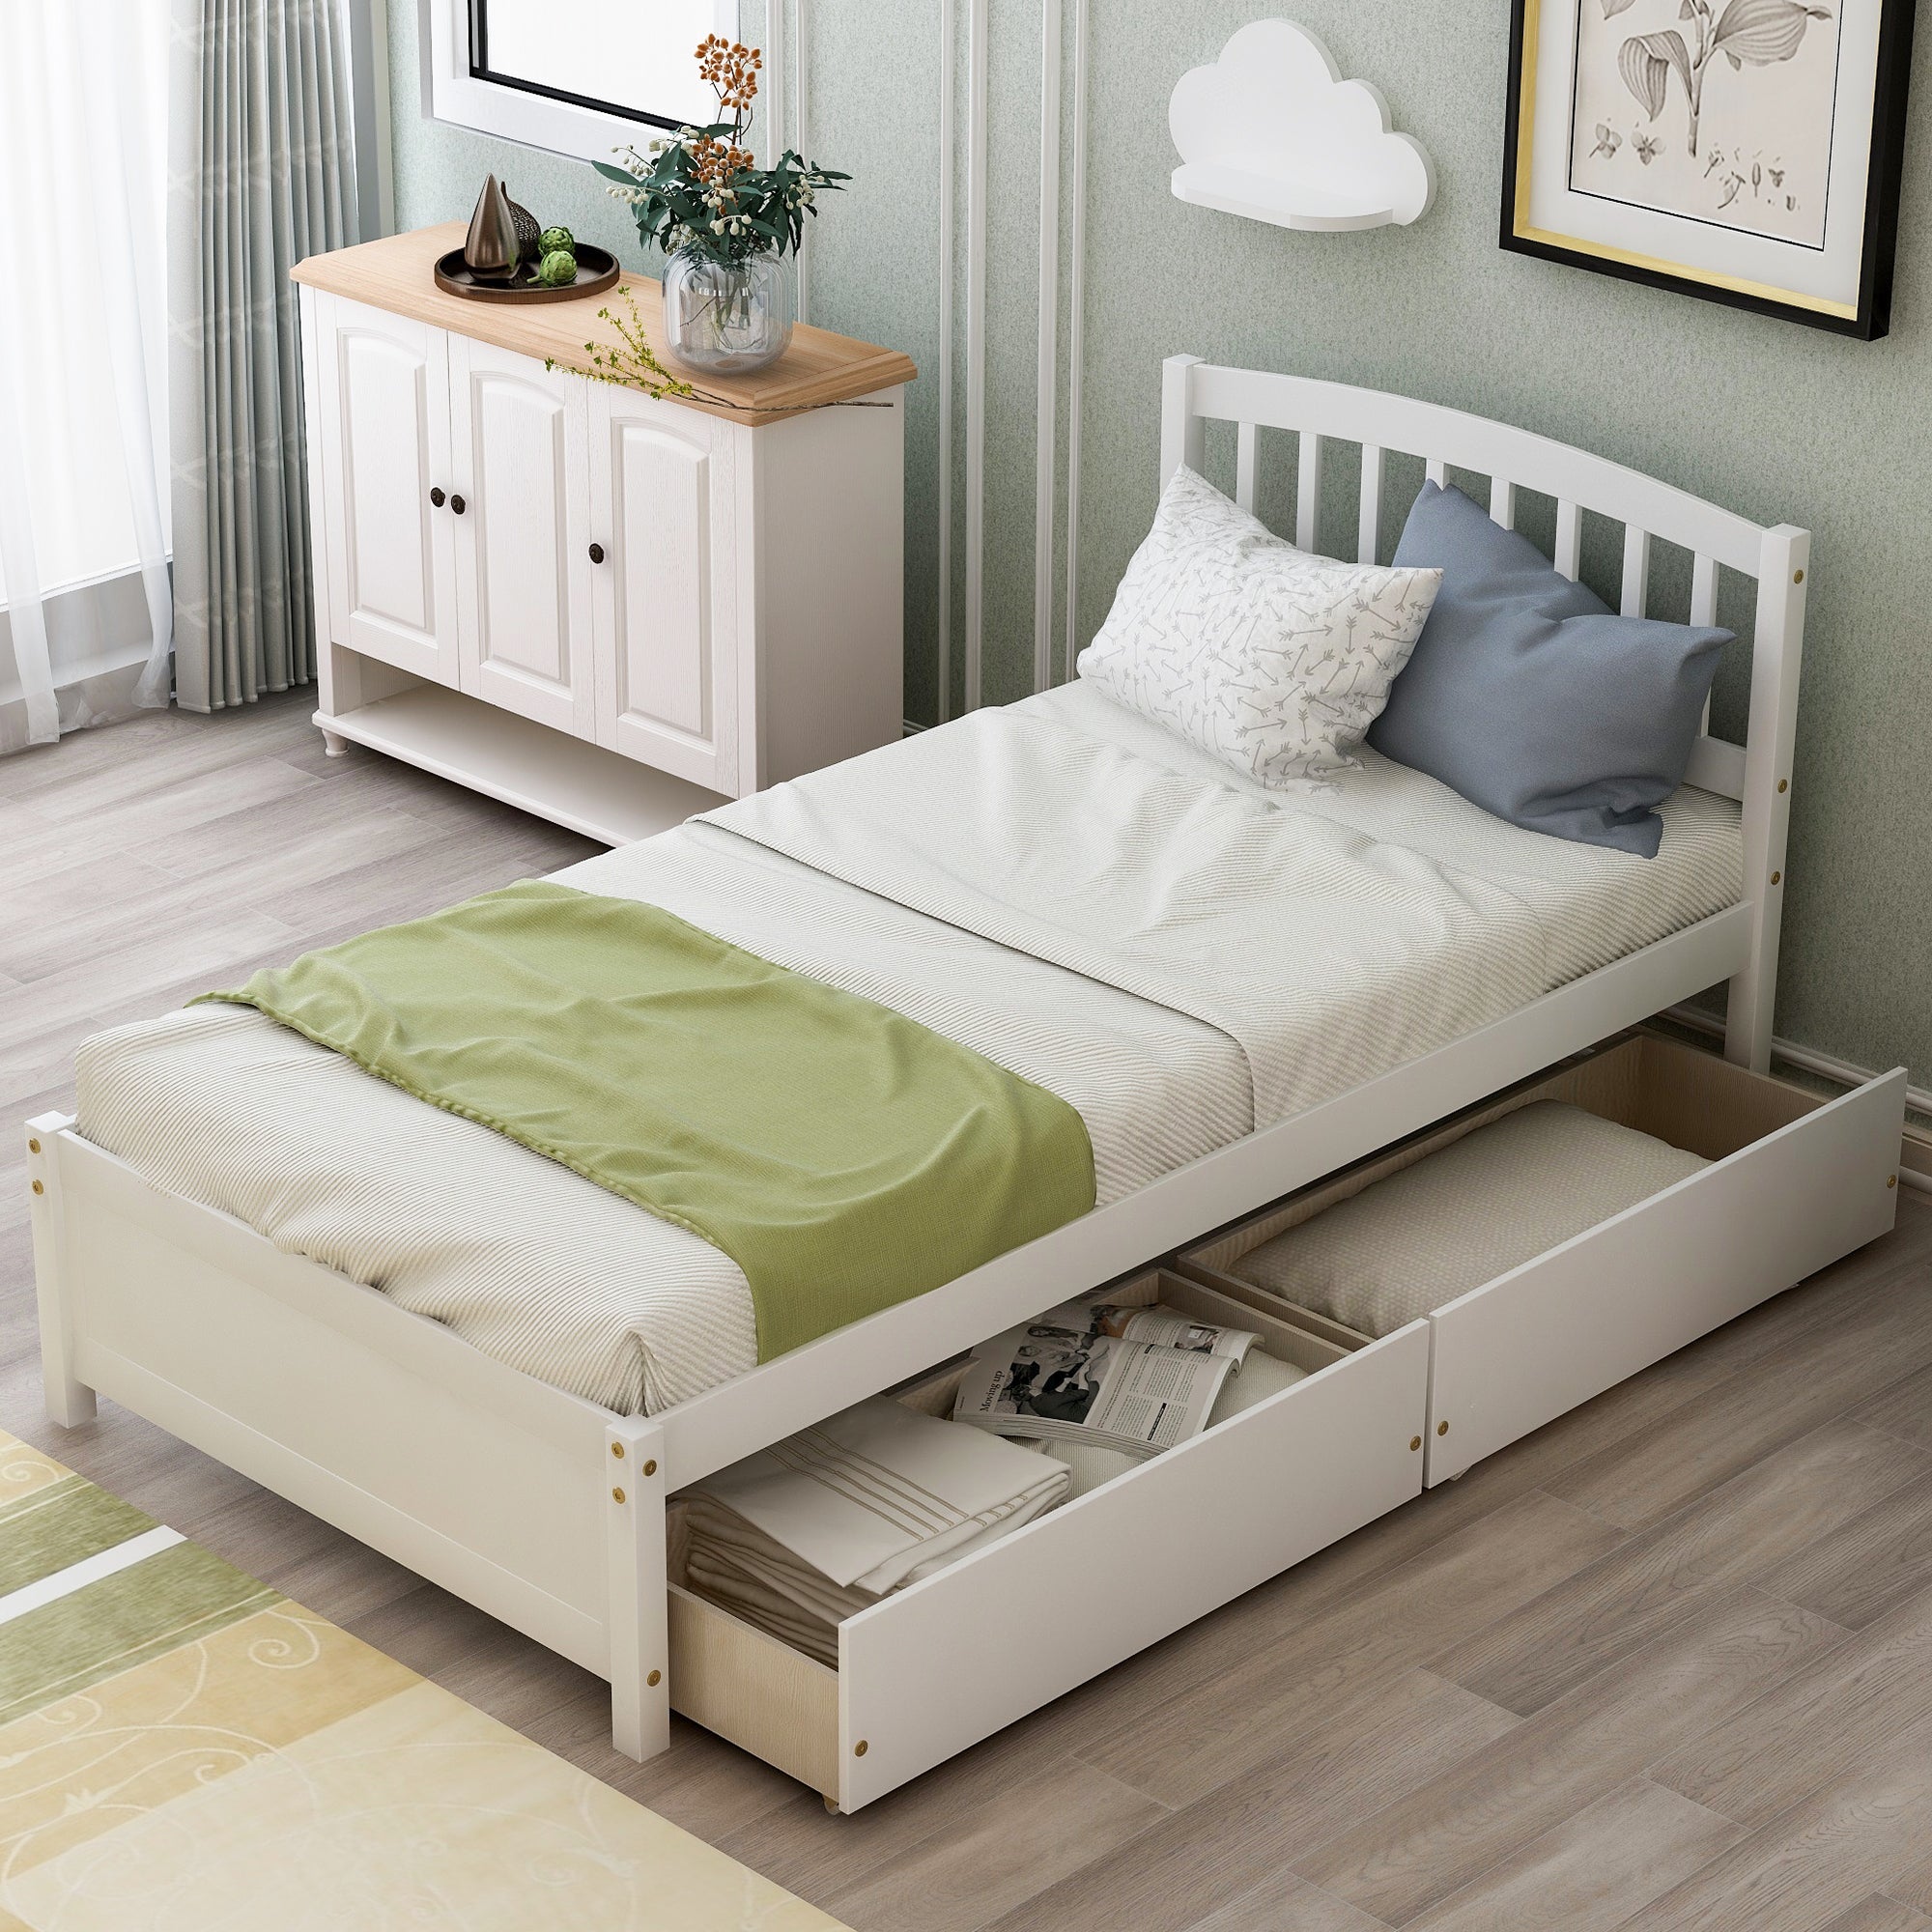 Twin Platform Storage Bed with Two Drawers and Headboard | White Wood Bed Frame | Space-Saving Solution